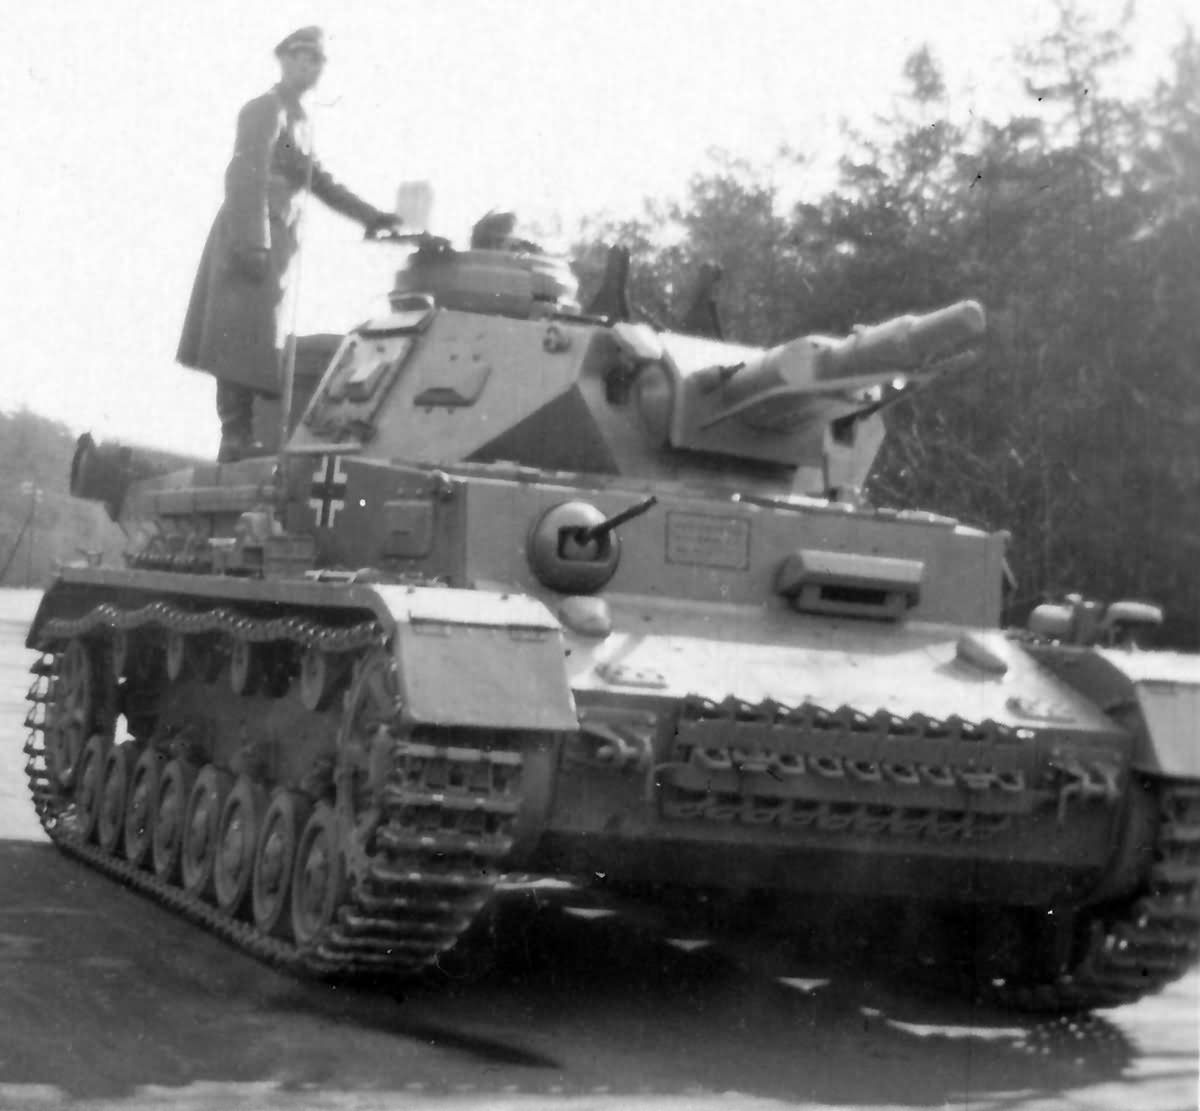 A Pz VI Ausf F1 with the sayed Kugelblend 50.